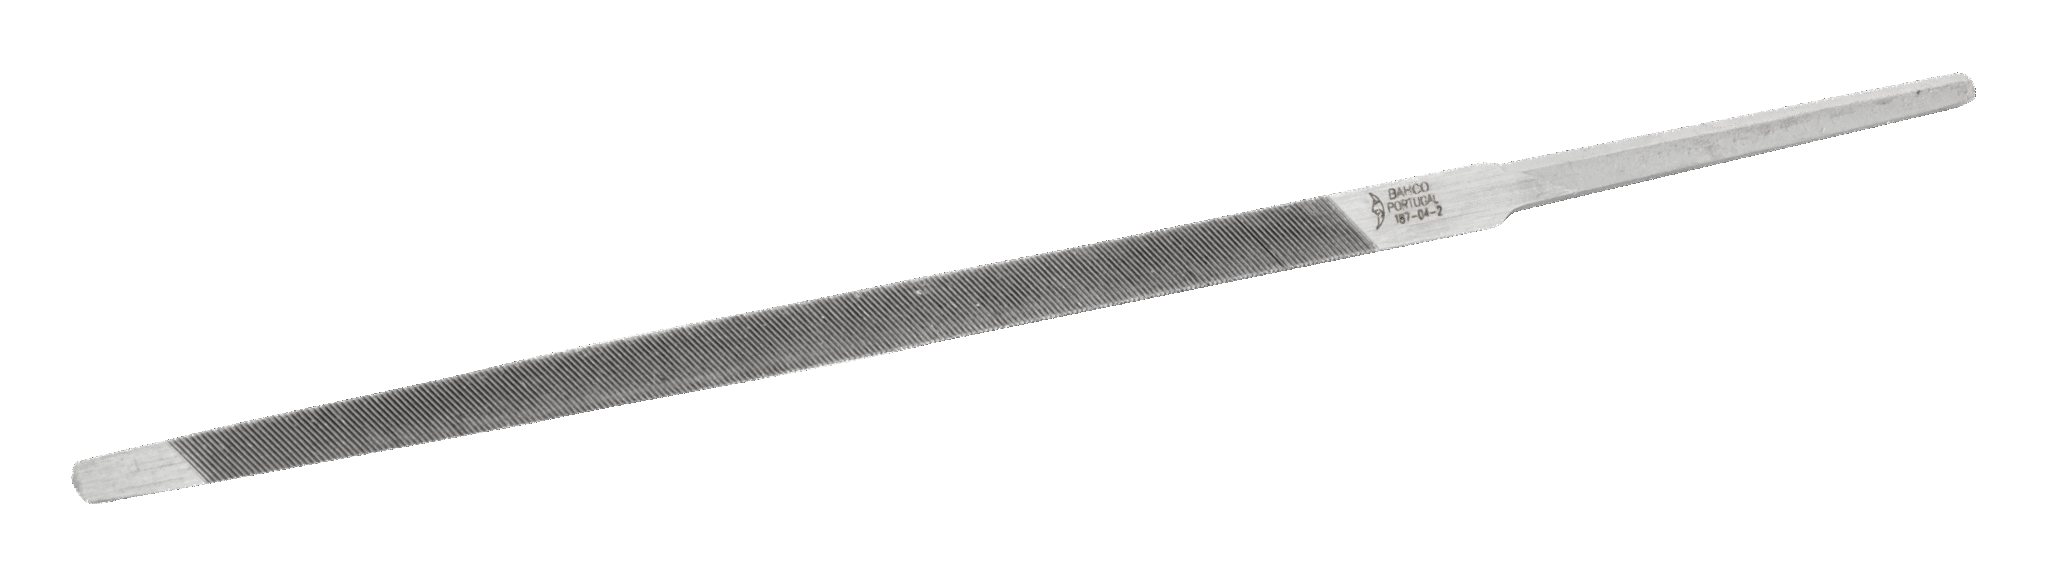 Bahco Extra Slim Taper sawfile triangulaire avec bords effilée vers le point 